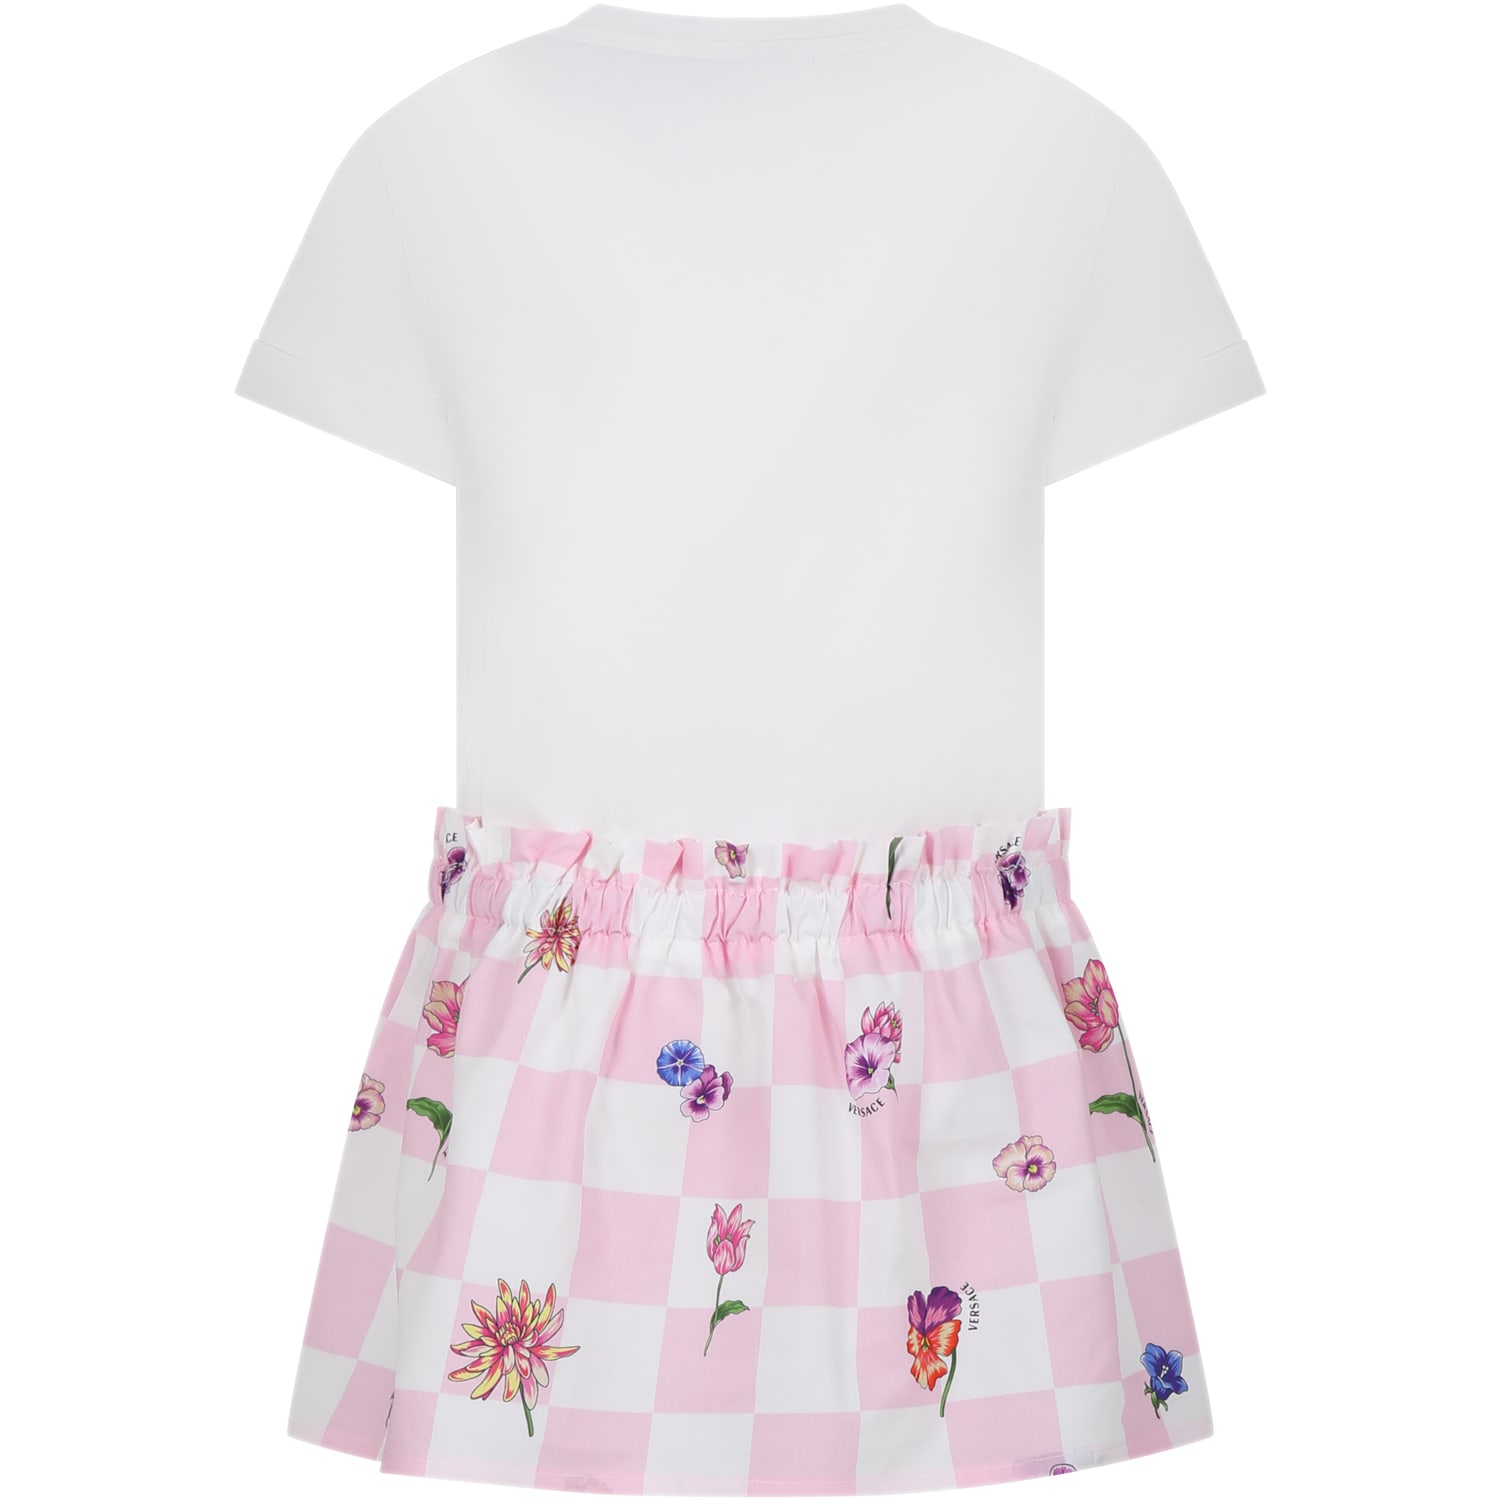 Shop Versace White Dress For Girl With Multicolor Print